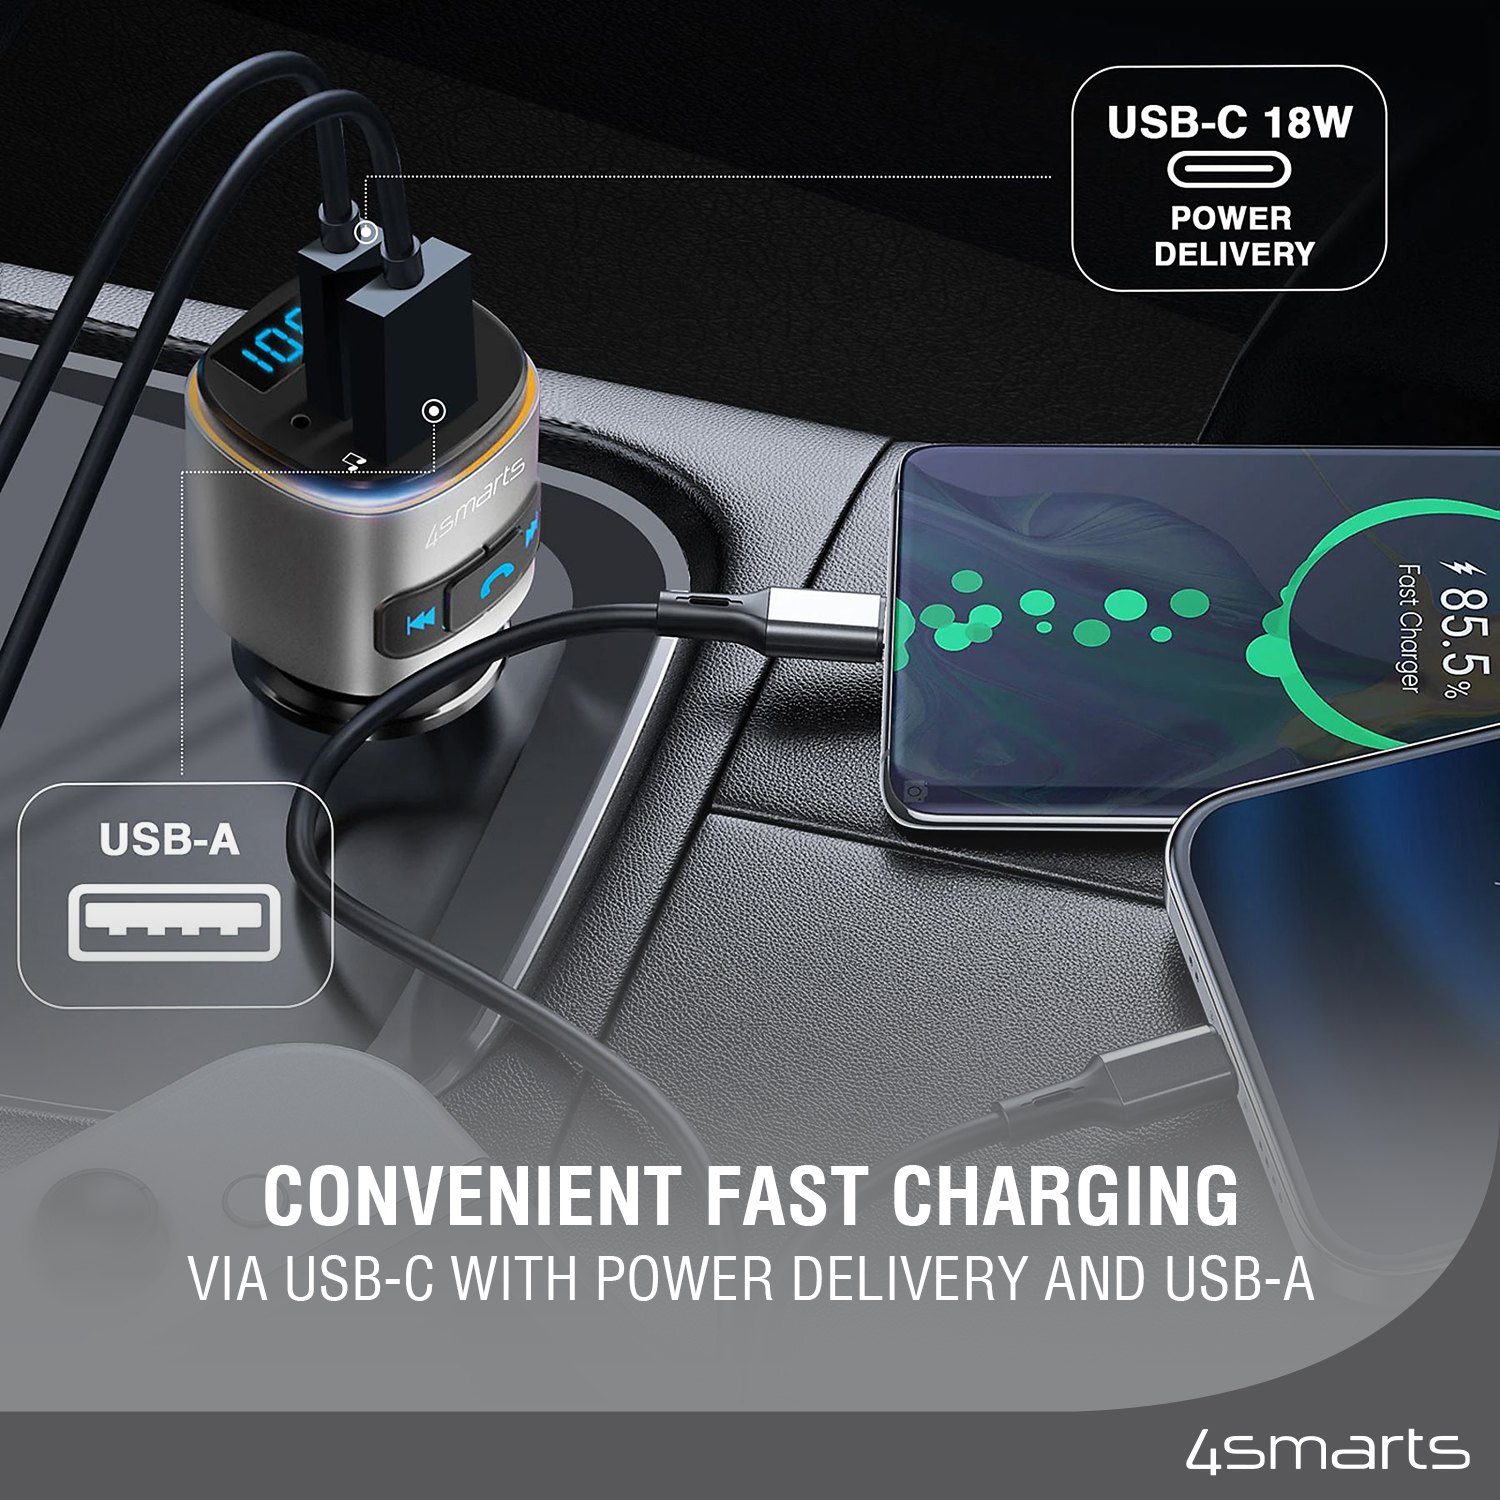 With an integrated USB-C port with PD3.0 and a USB-A port, the 4smarts Bluetooth Transmitter Media&Assist 2 can charge multiple devices simultaneously and quickly.